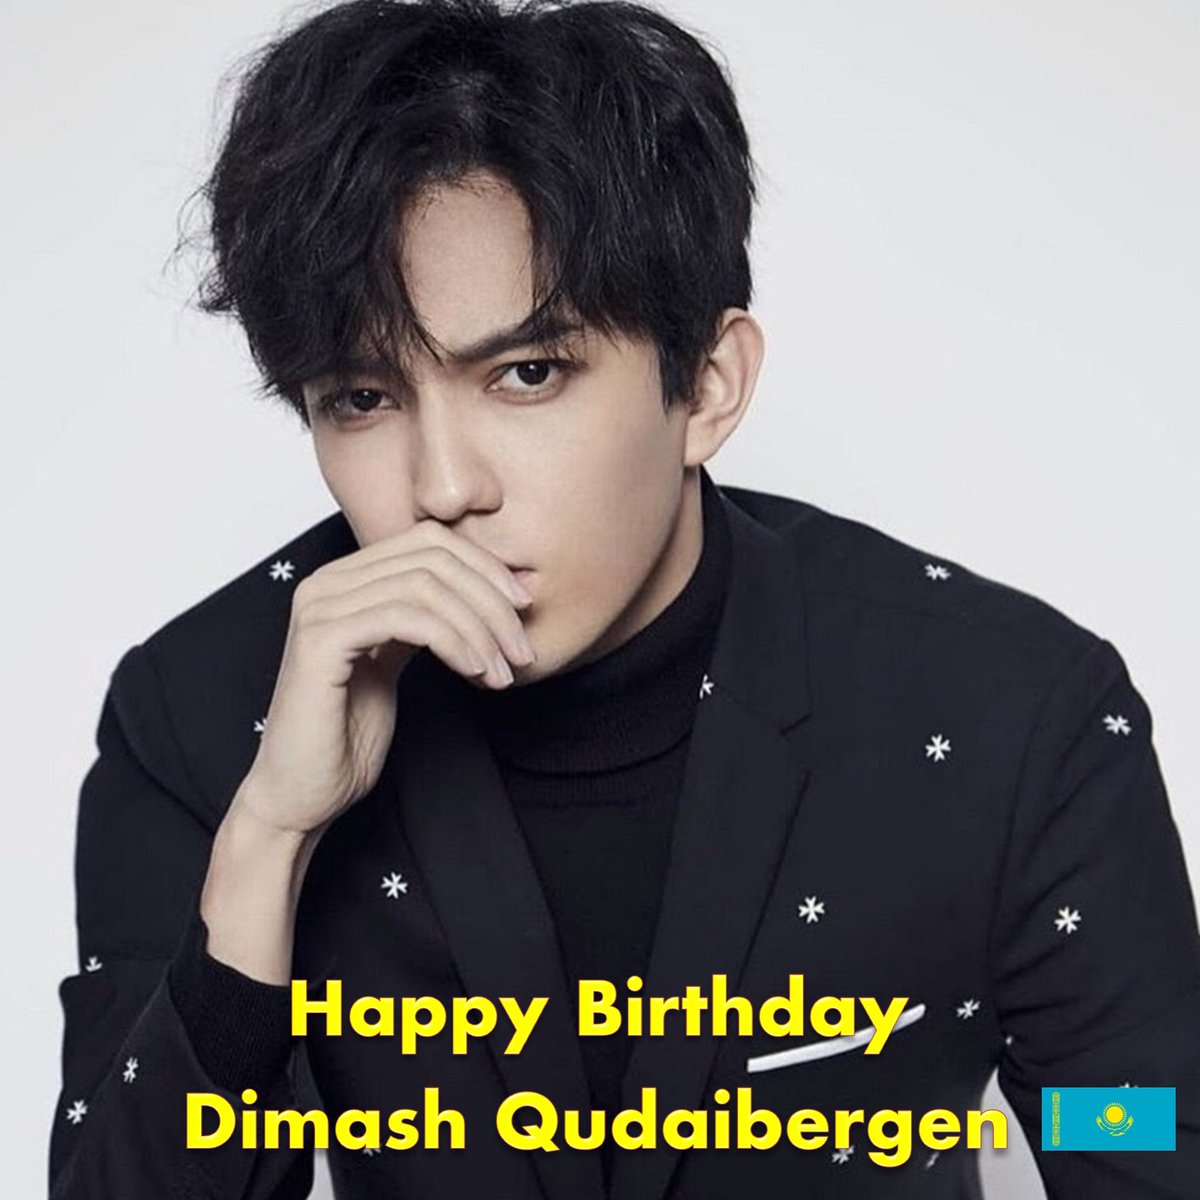 Happy 29th Birthday to the very handsome and hugely talented #Kazakh singer, songwriter and multi-instrumentalist, #DimashQudaibergen, who is known for his exceptionally wide vocal range. He has performed songs in thirteen different languages! 👏🎂🎉🌟👑❤️